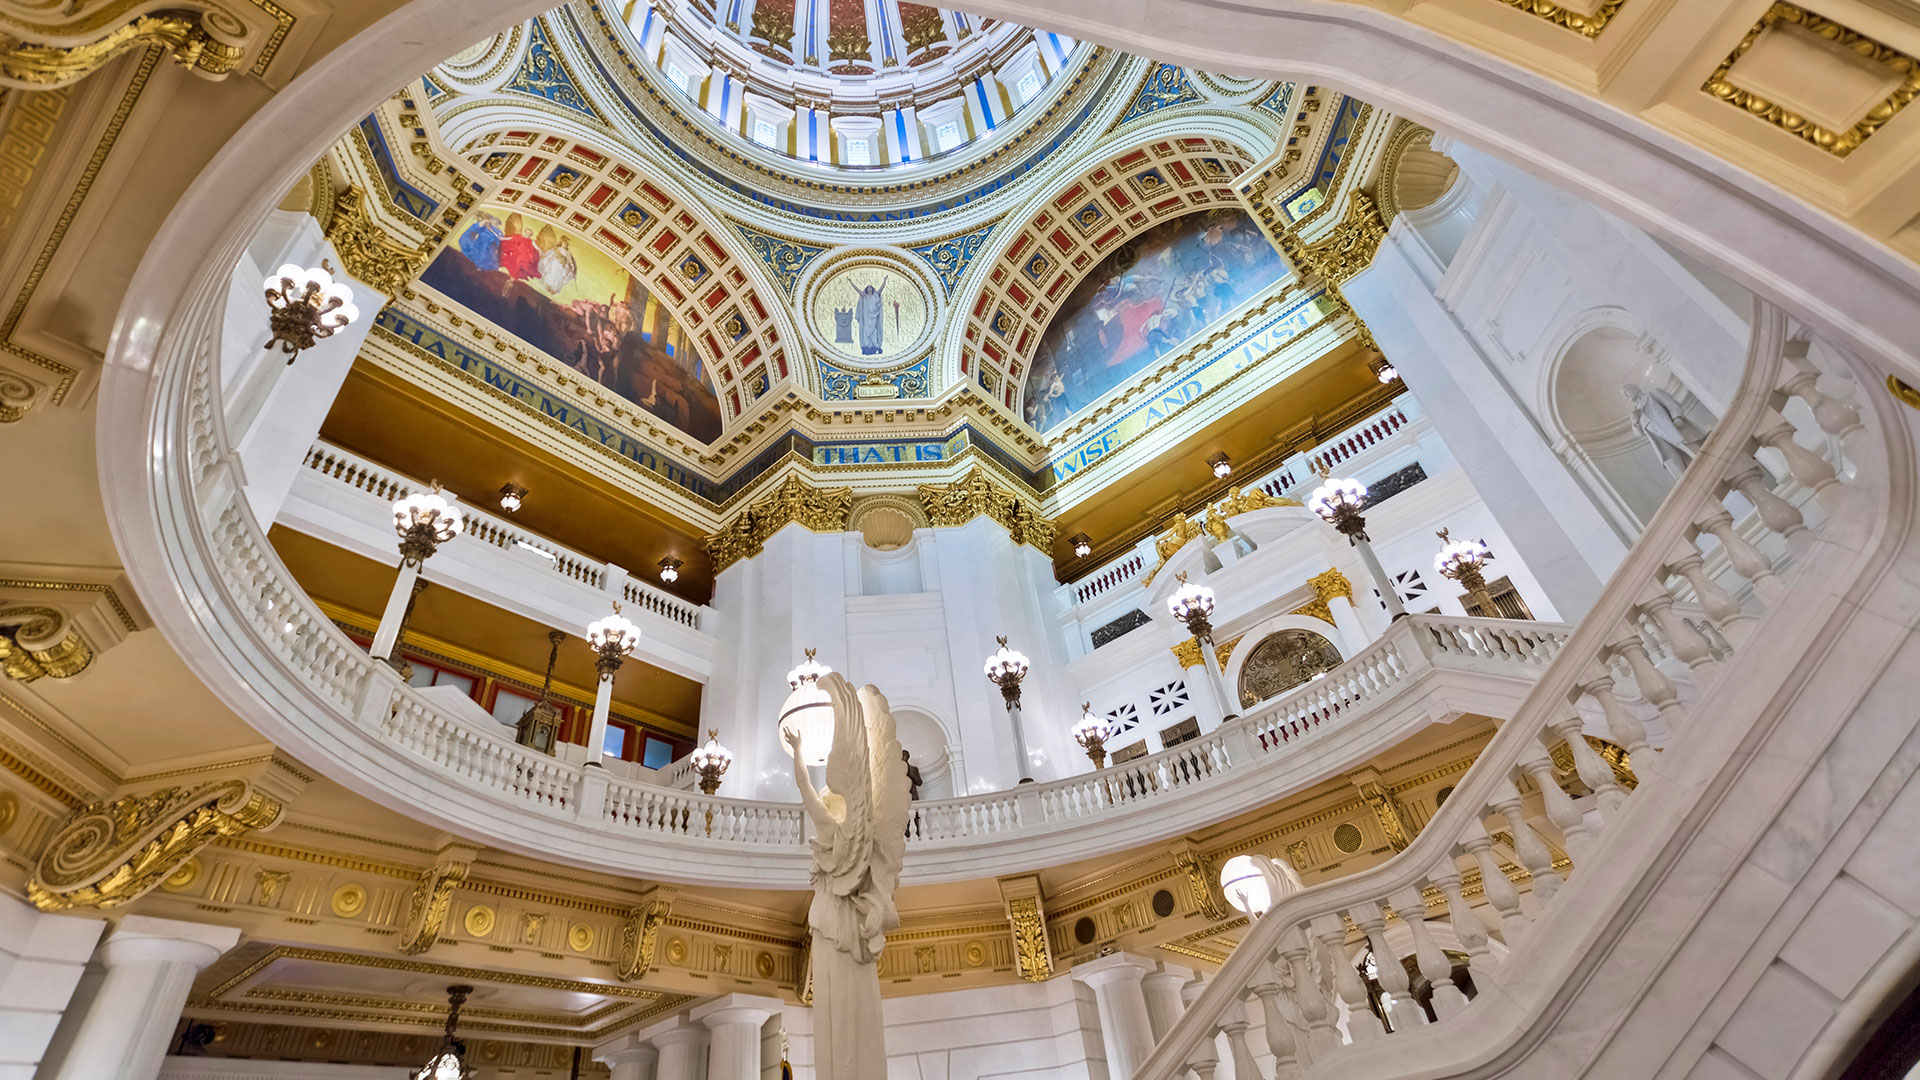 View of the rotunda and interior balcony of the Pennsylvania State Capitol in Harrisburg